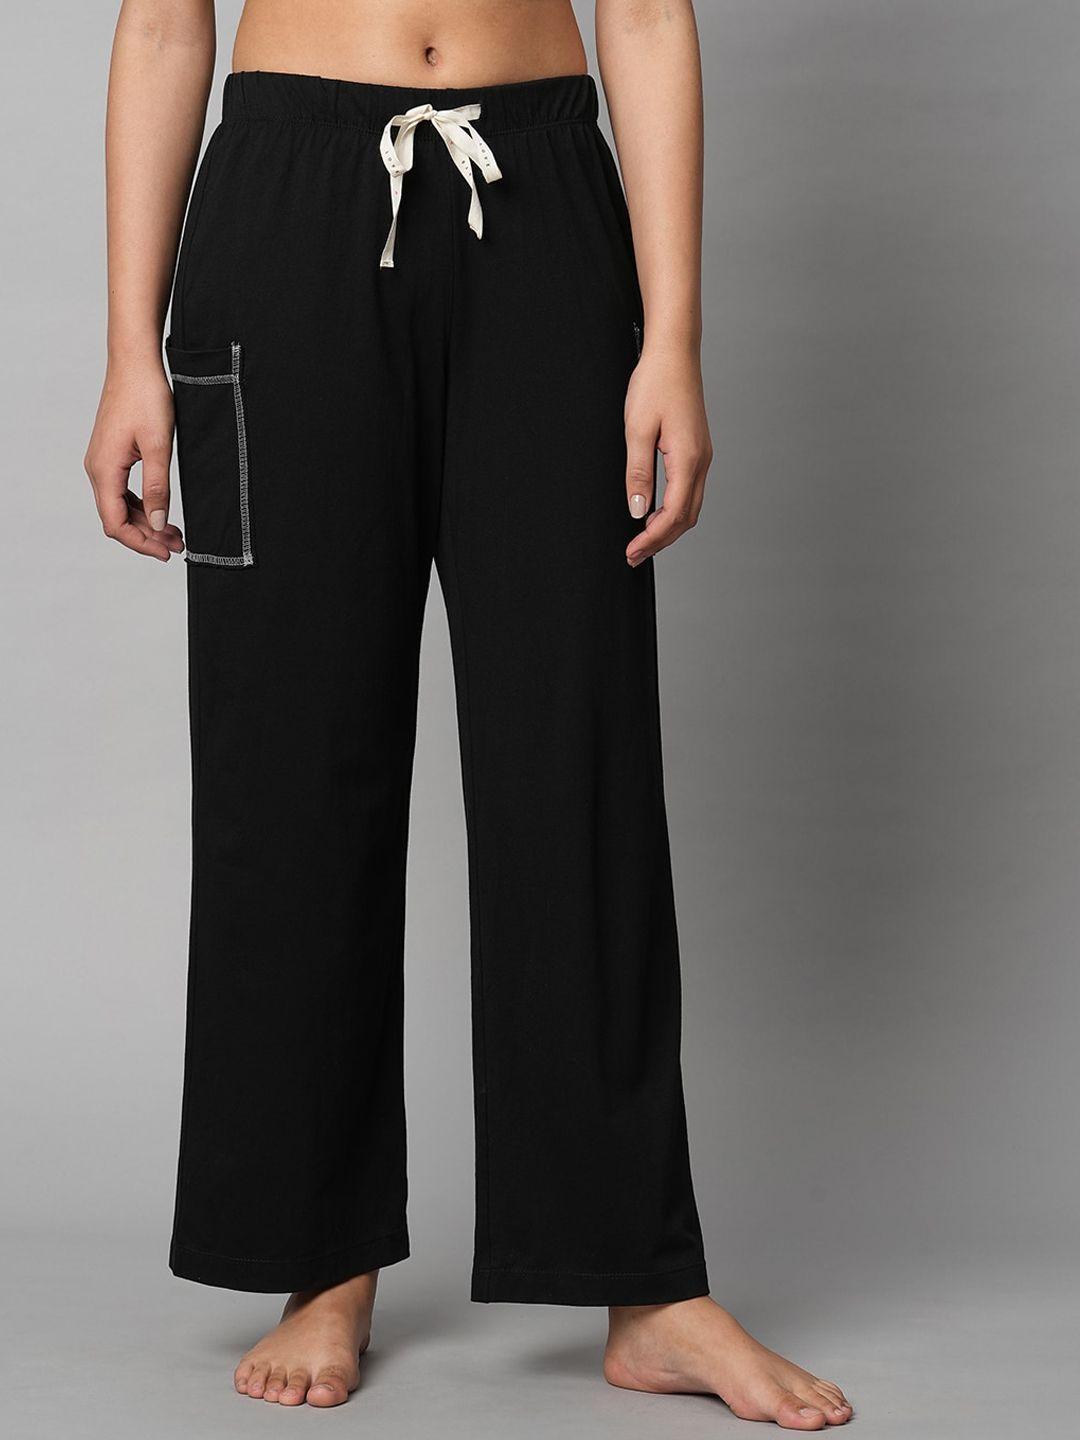 chemistry mid-rise cargo style lounge pants